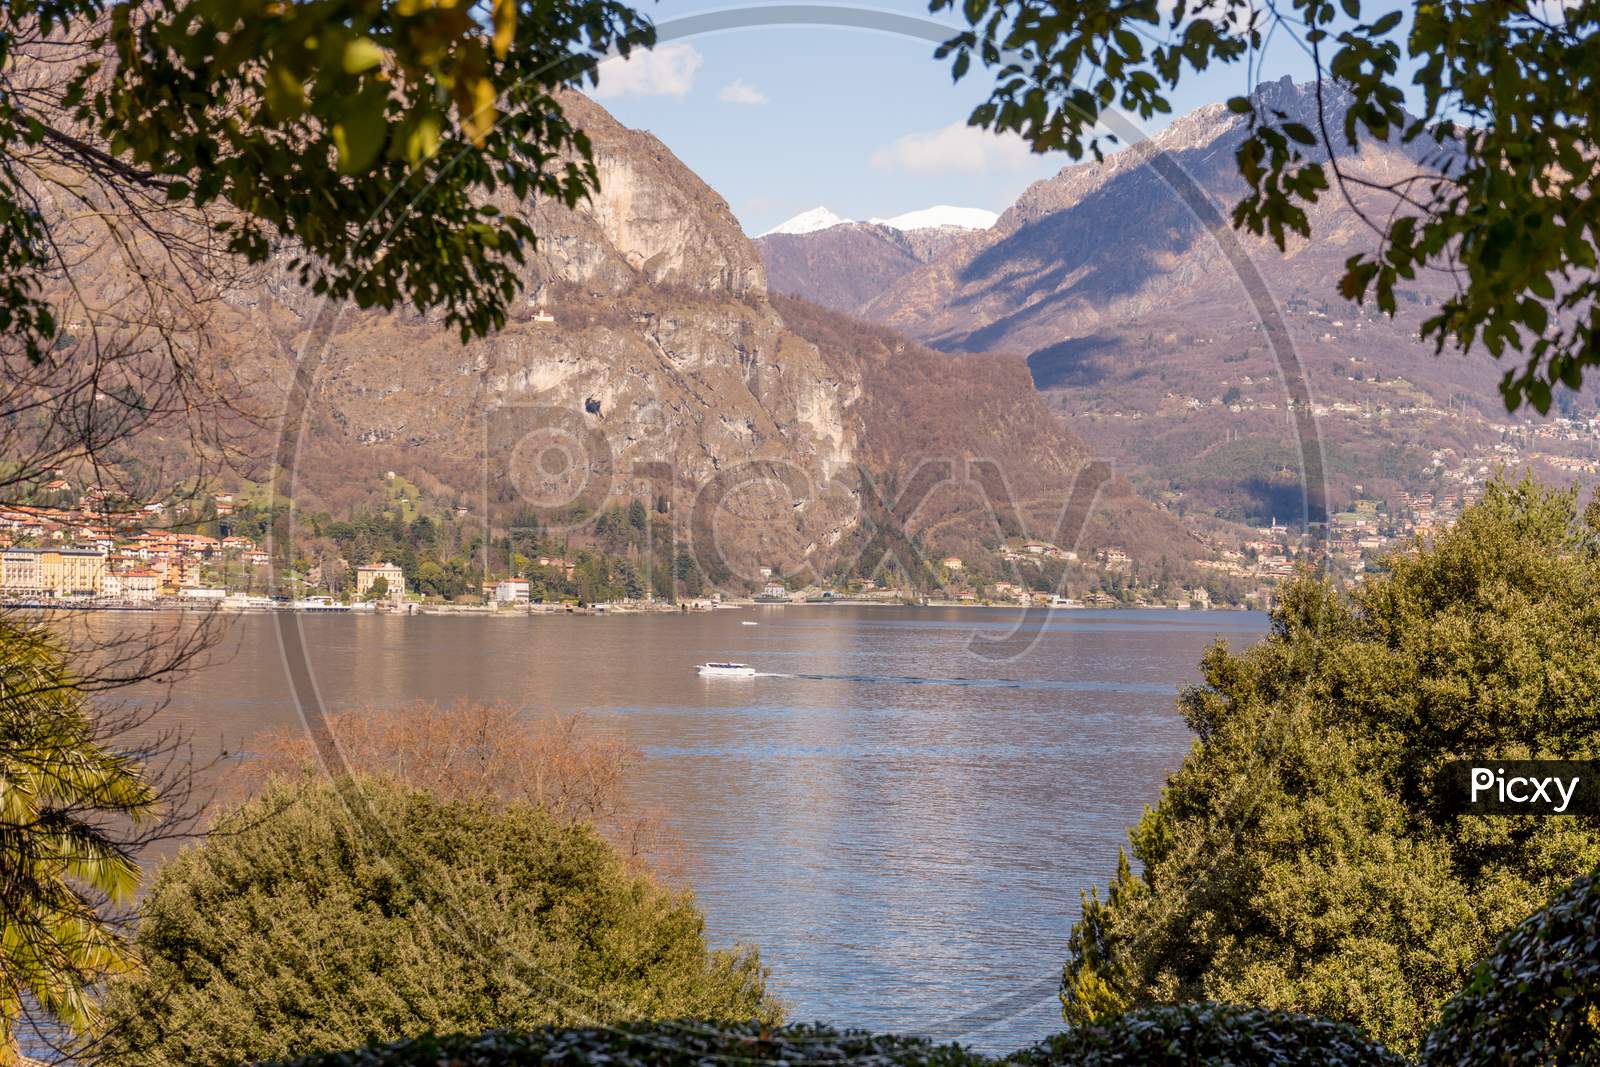 Italy, Bellagio, Lake Como, Cadenabbia, Scenic View Of Lake And Mountains Against Sky